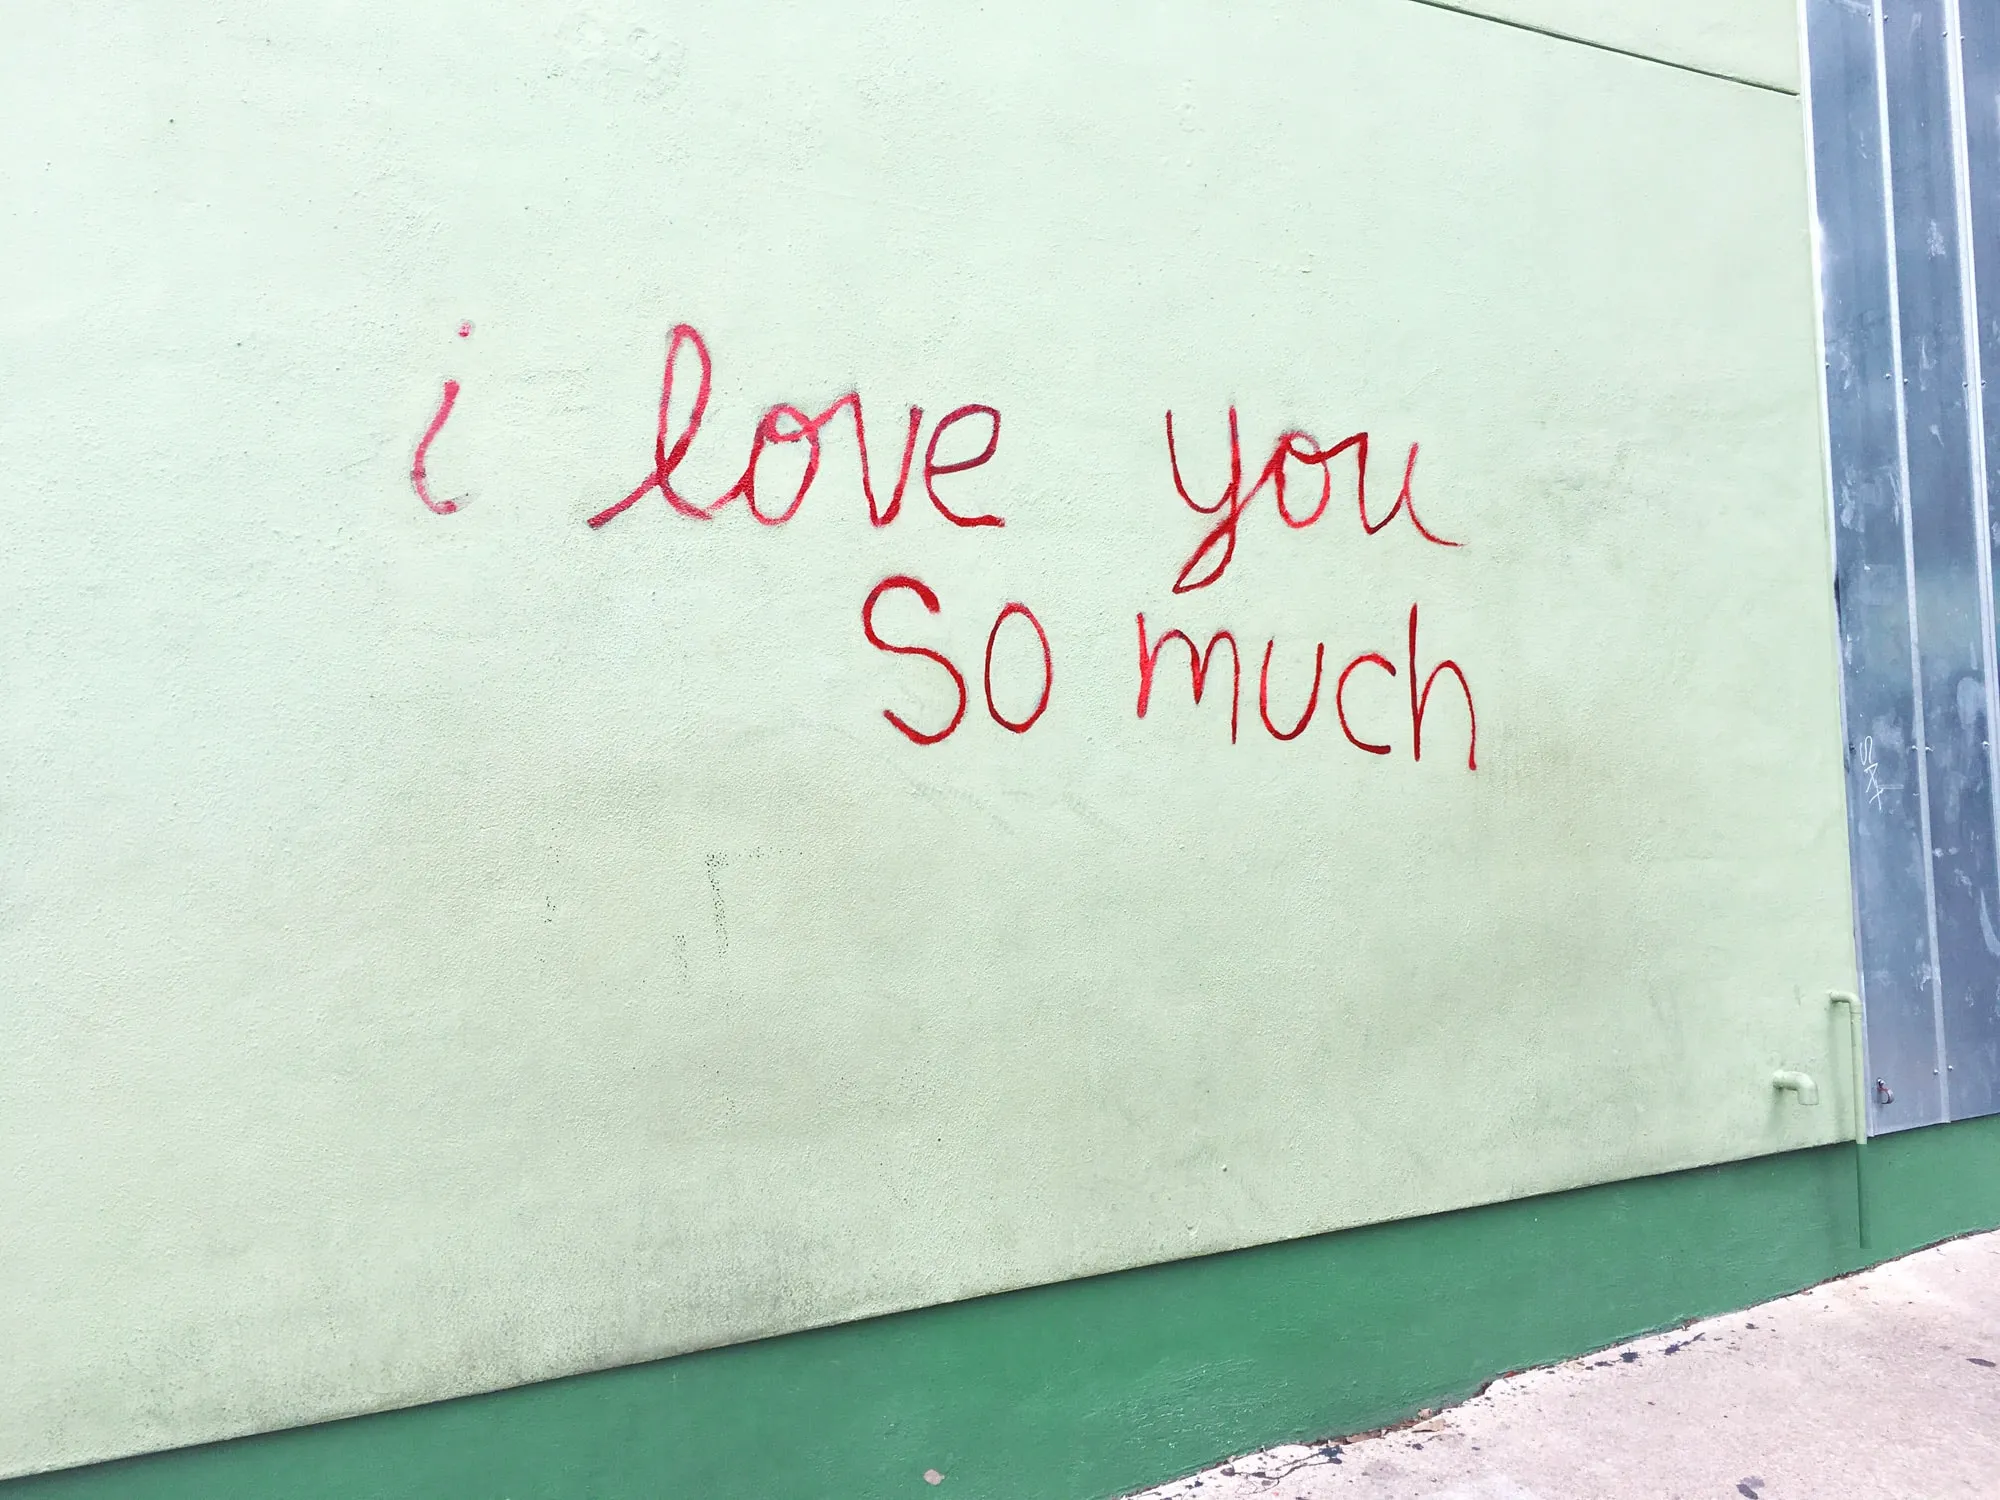 I Love You So Much Mural in Austin, Texas